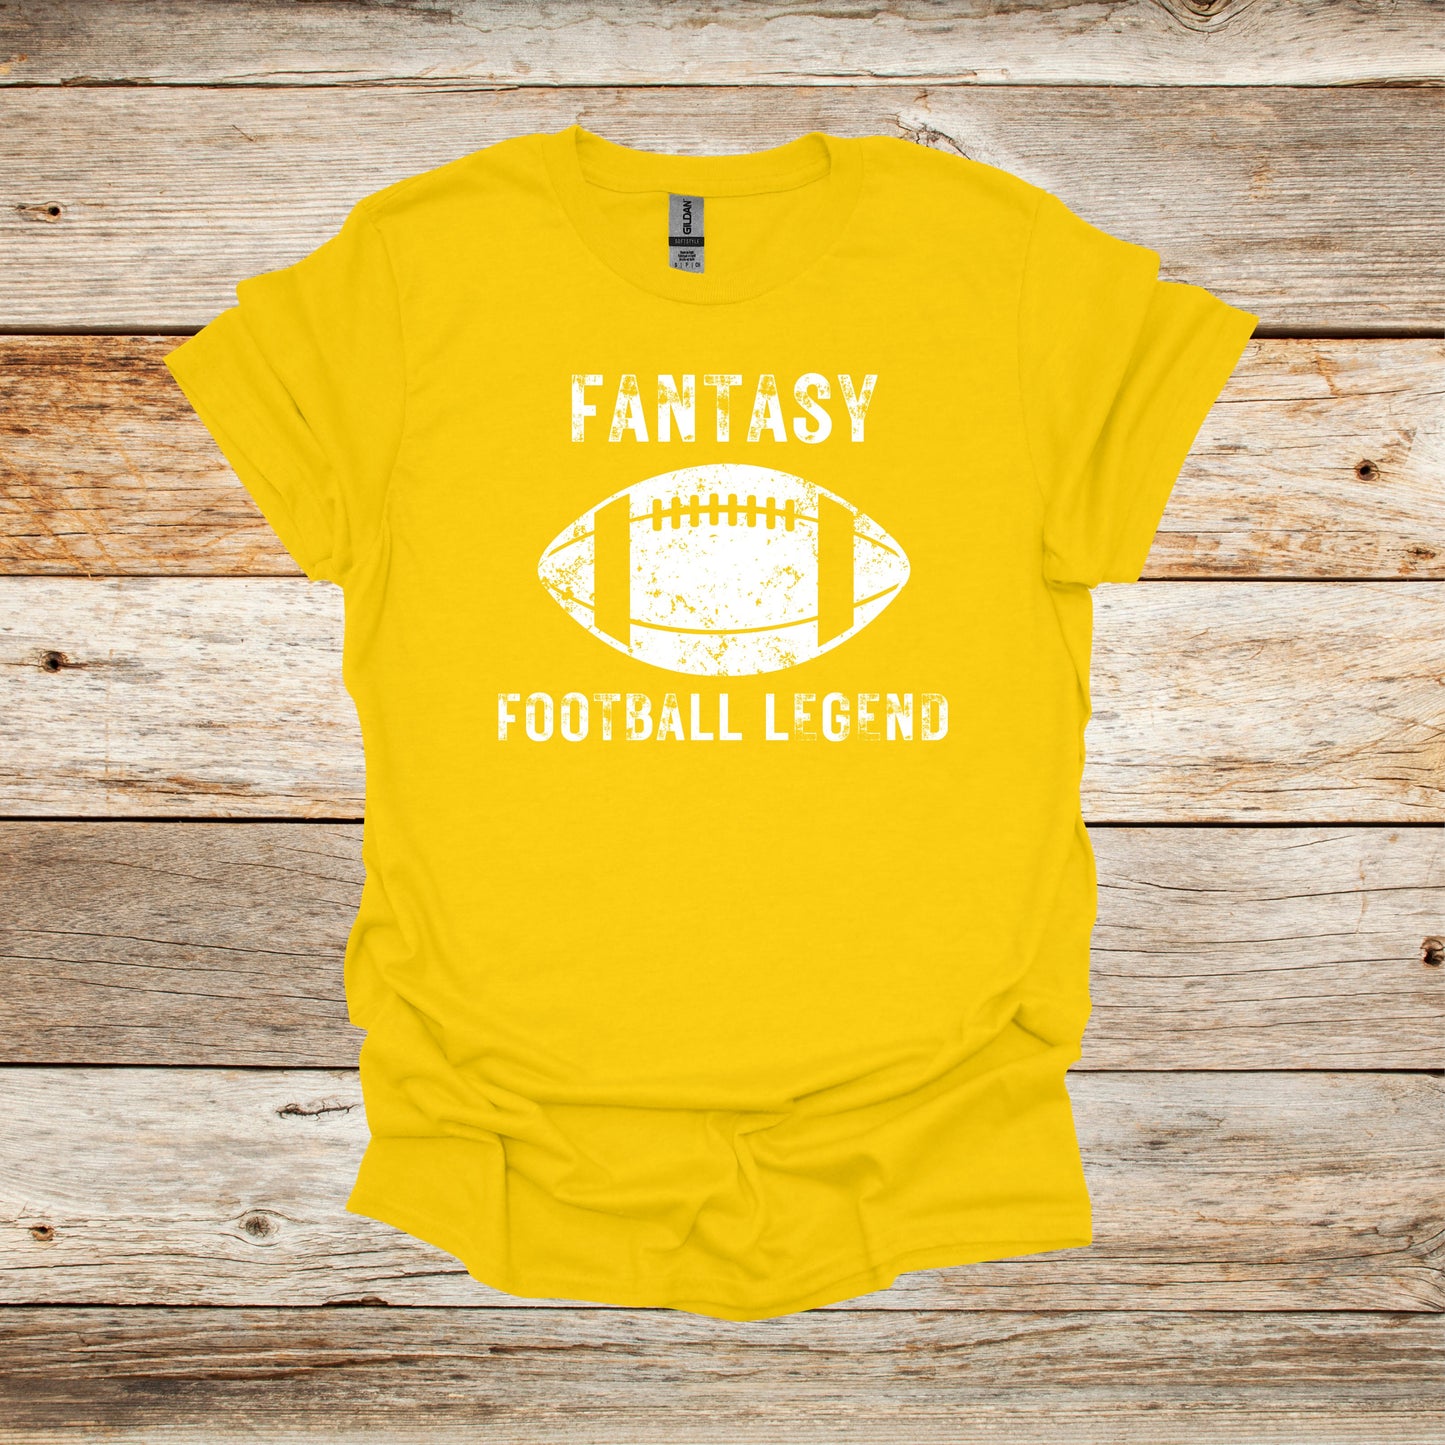 Football T-Shirt - Adult and Children's Tee Shirts - Fantasy Football - Sports T-Shirts Graphic Avenue Daisy Adult Small 